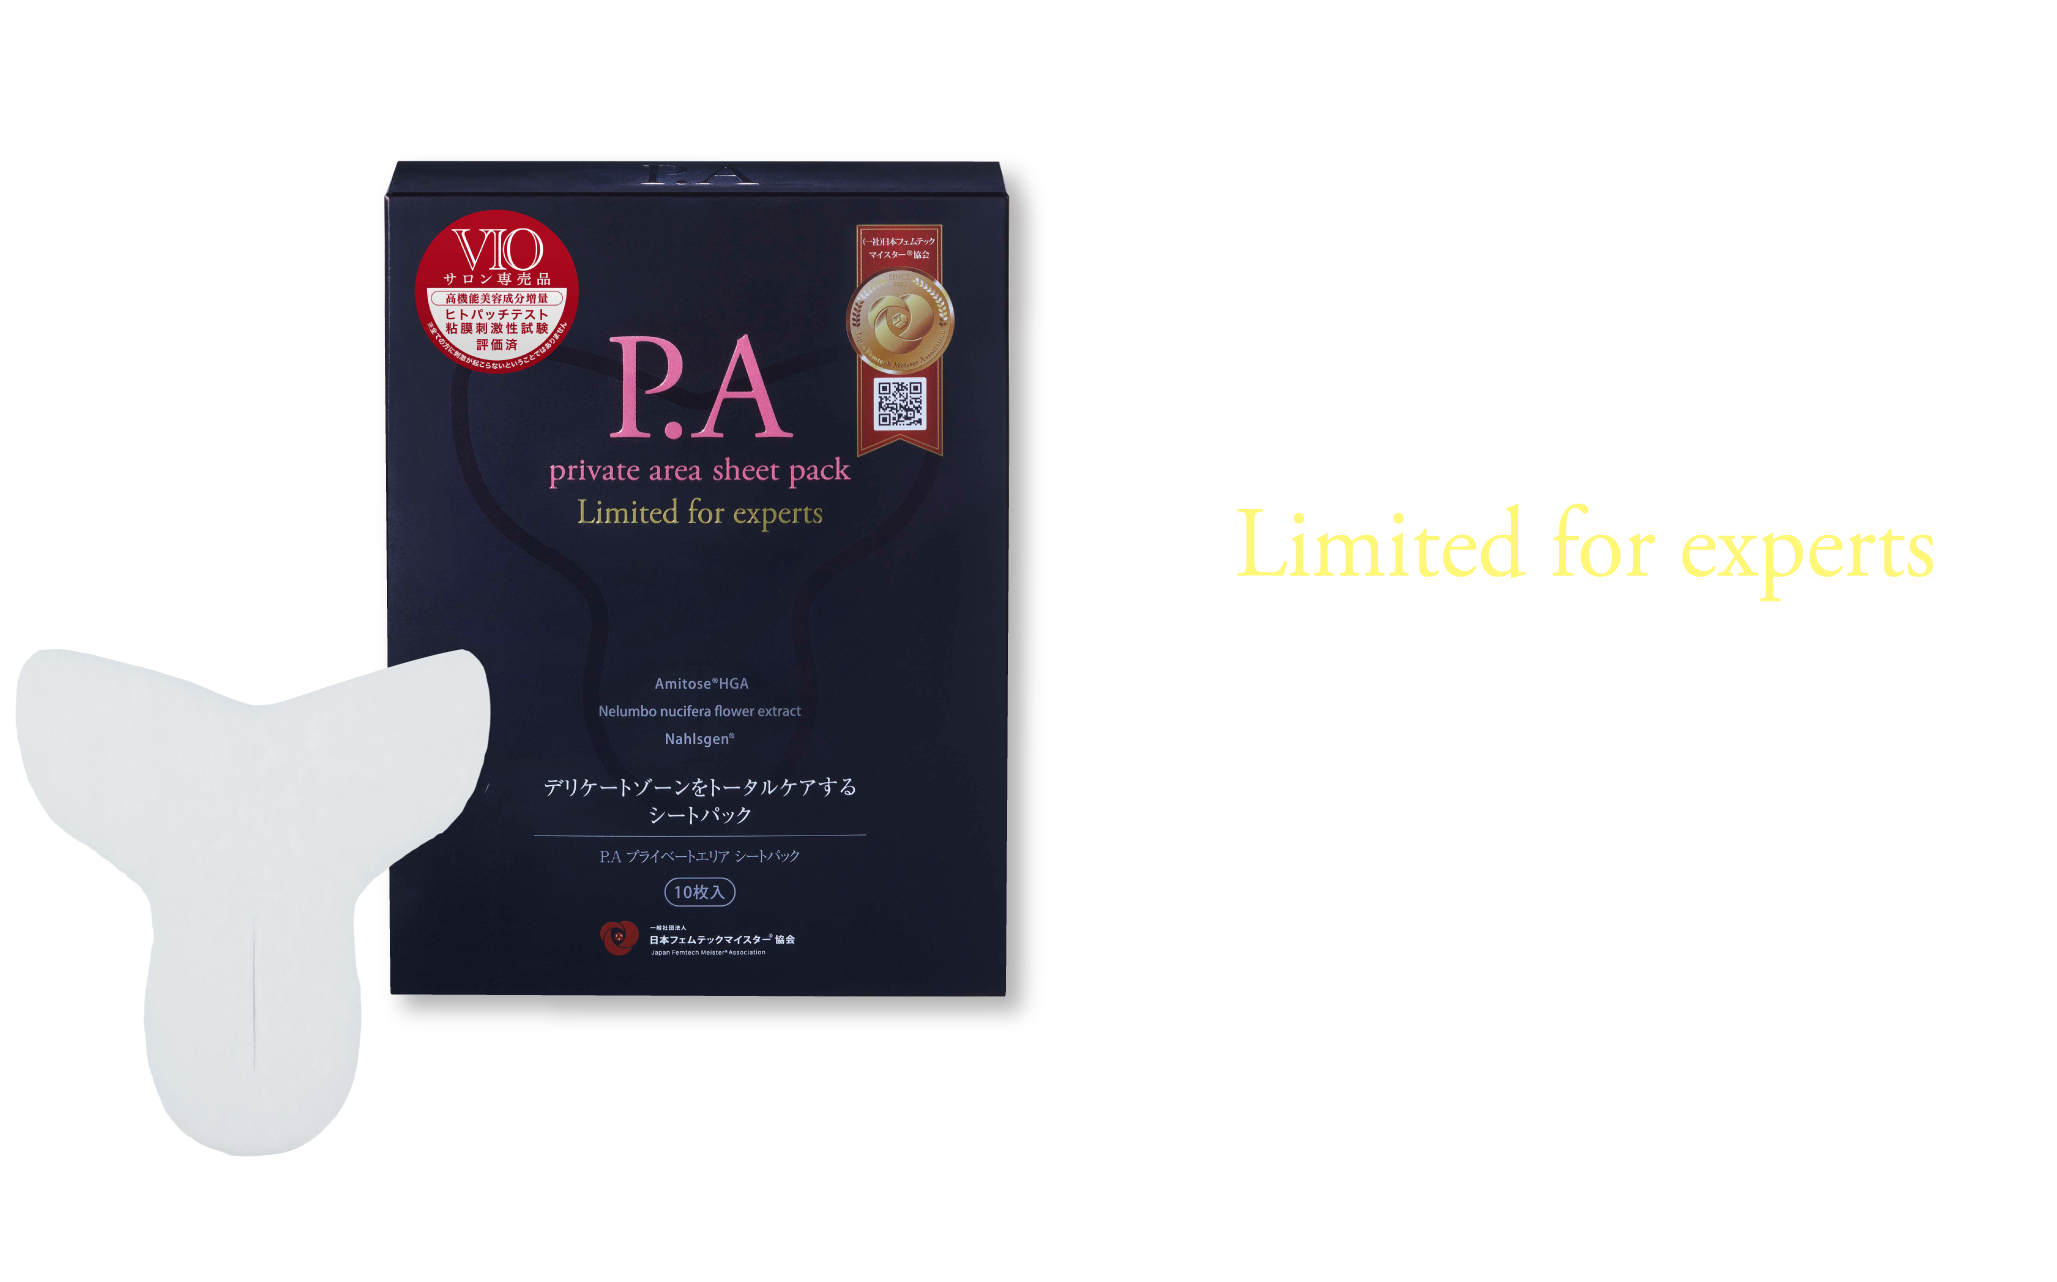 P.A private area sheet pack Limited for experts ご自宅やエステサロンでVIOのスペシャルケア 高機能美容成分配合・弱酸性 P.A プライベートエリア シートパック［サロン専売品］